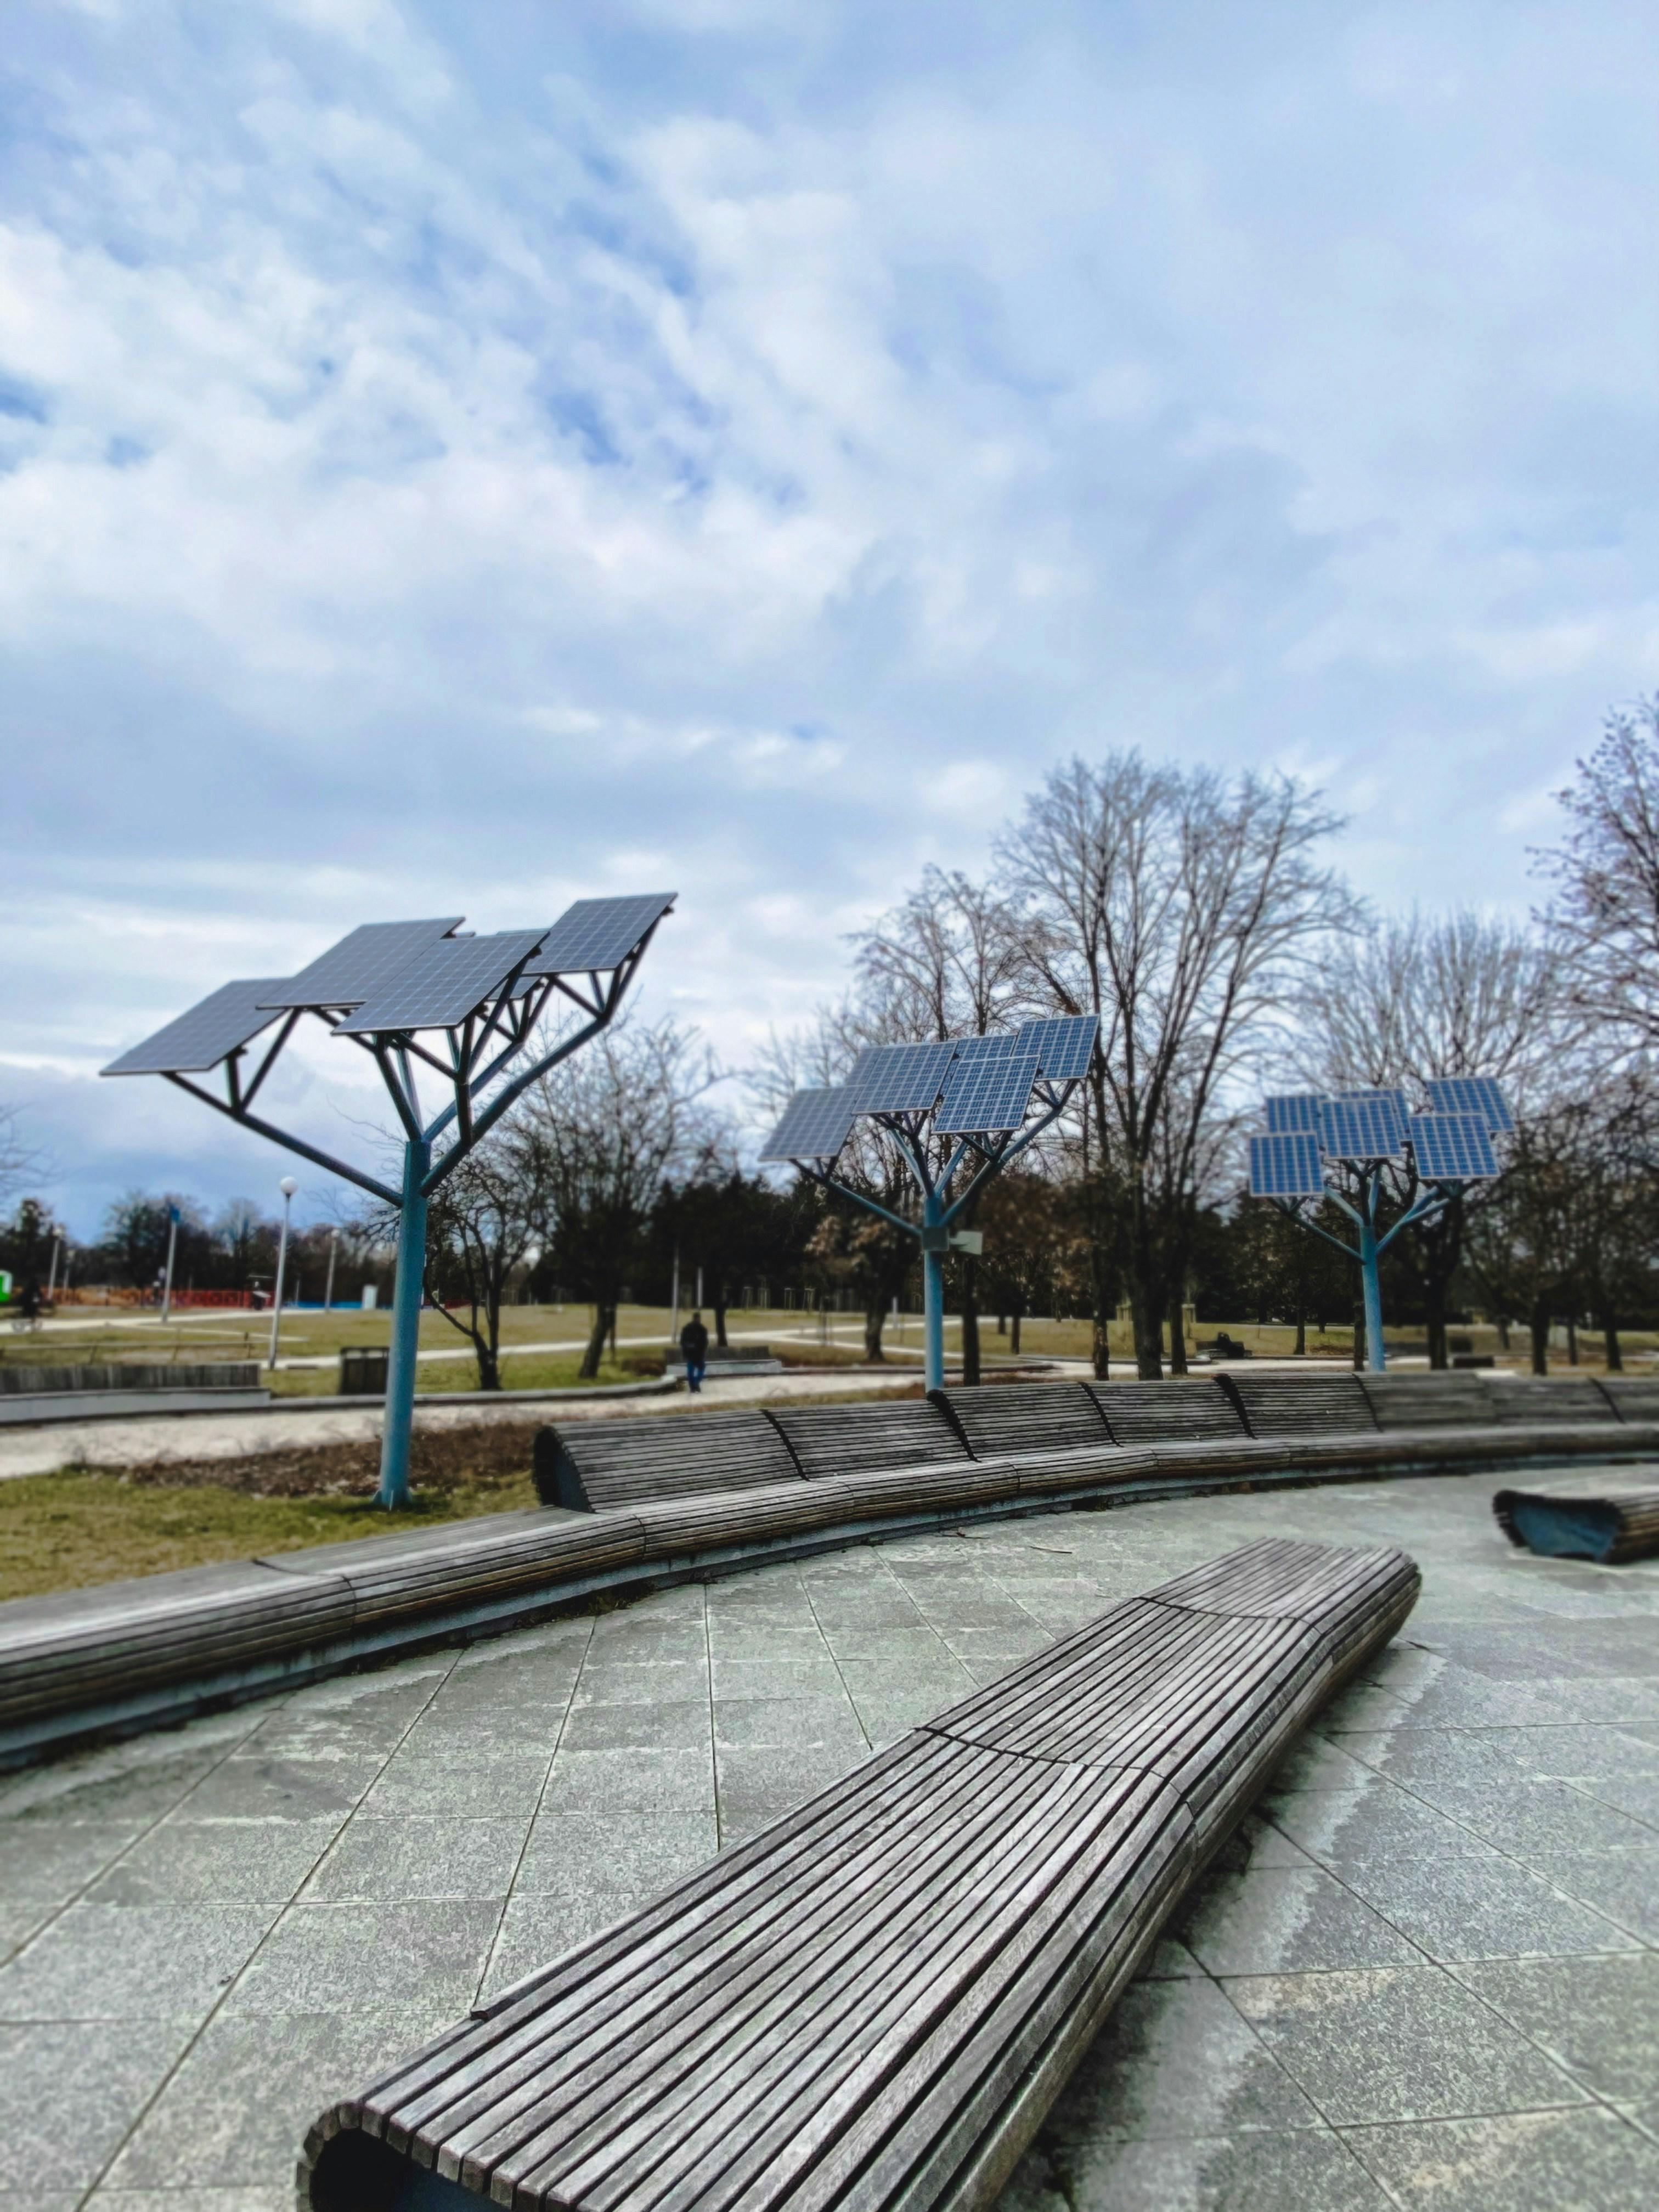 A park in Warsaw, Poland. There are long wooden branches and sun collectors installed in the park.